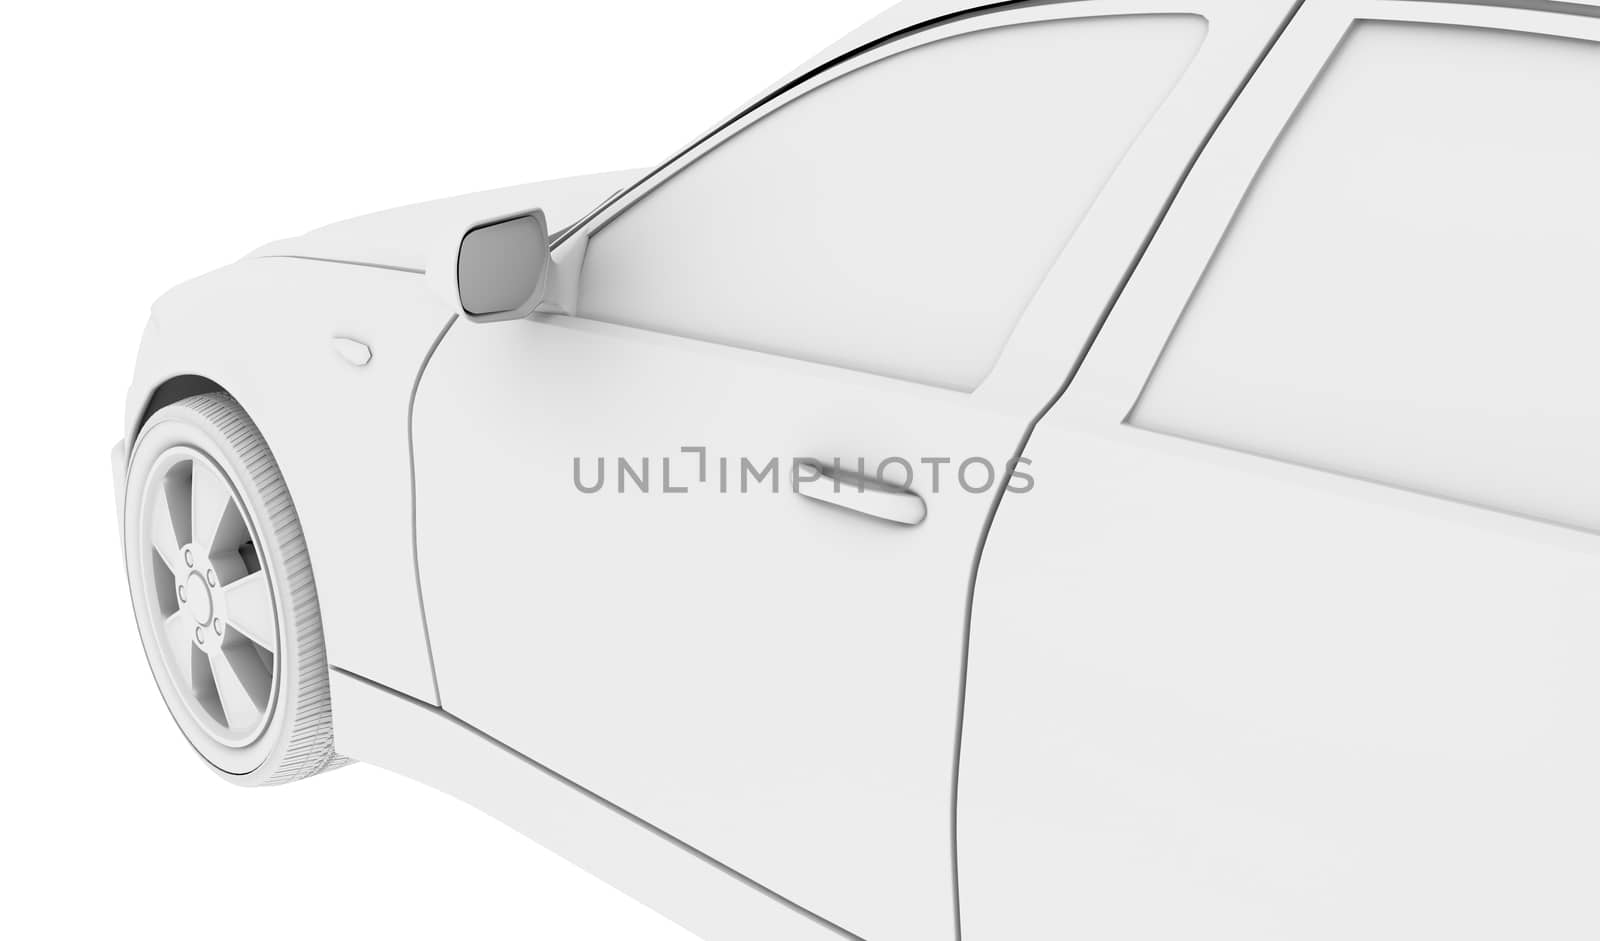 Car model on isolated white background, close-up view